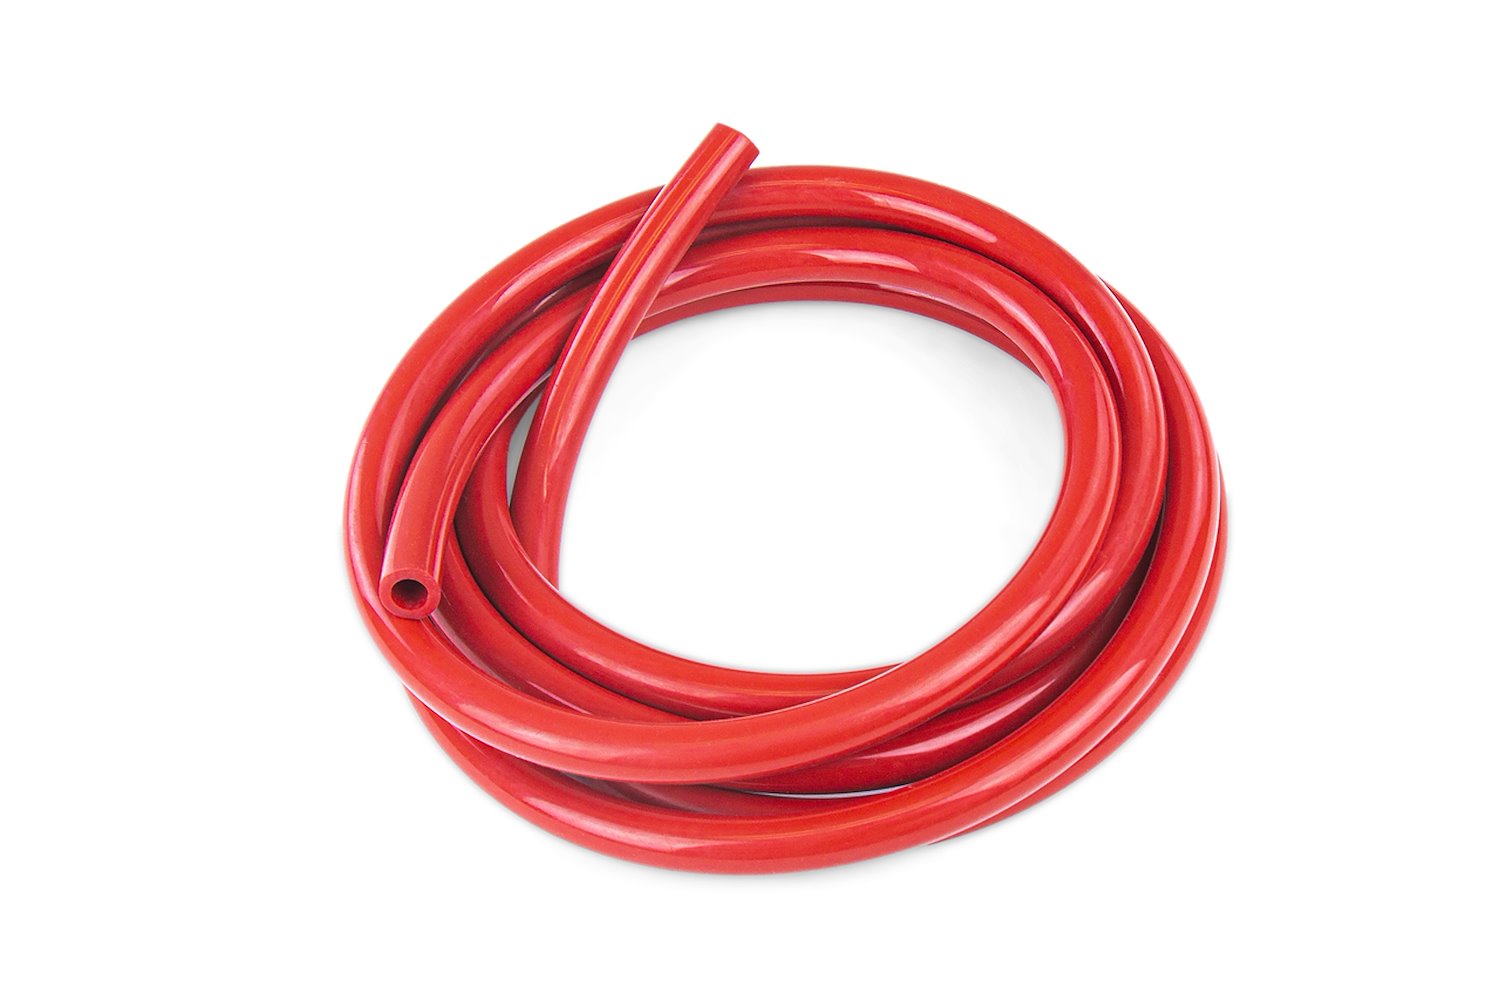 HTSVH7-REDx25 High-Temperature Silicone Vacuum Hose Tubing, 9/32 in. ID, 25 ft. Roll, Red